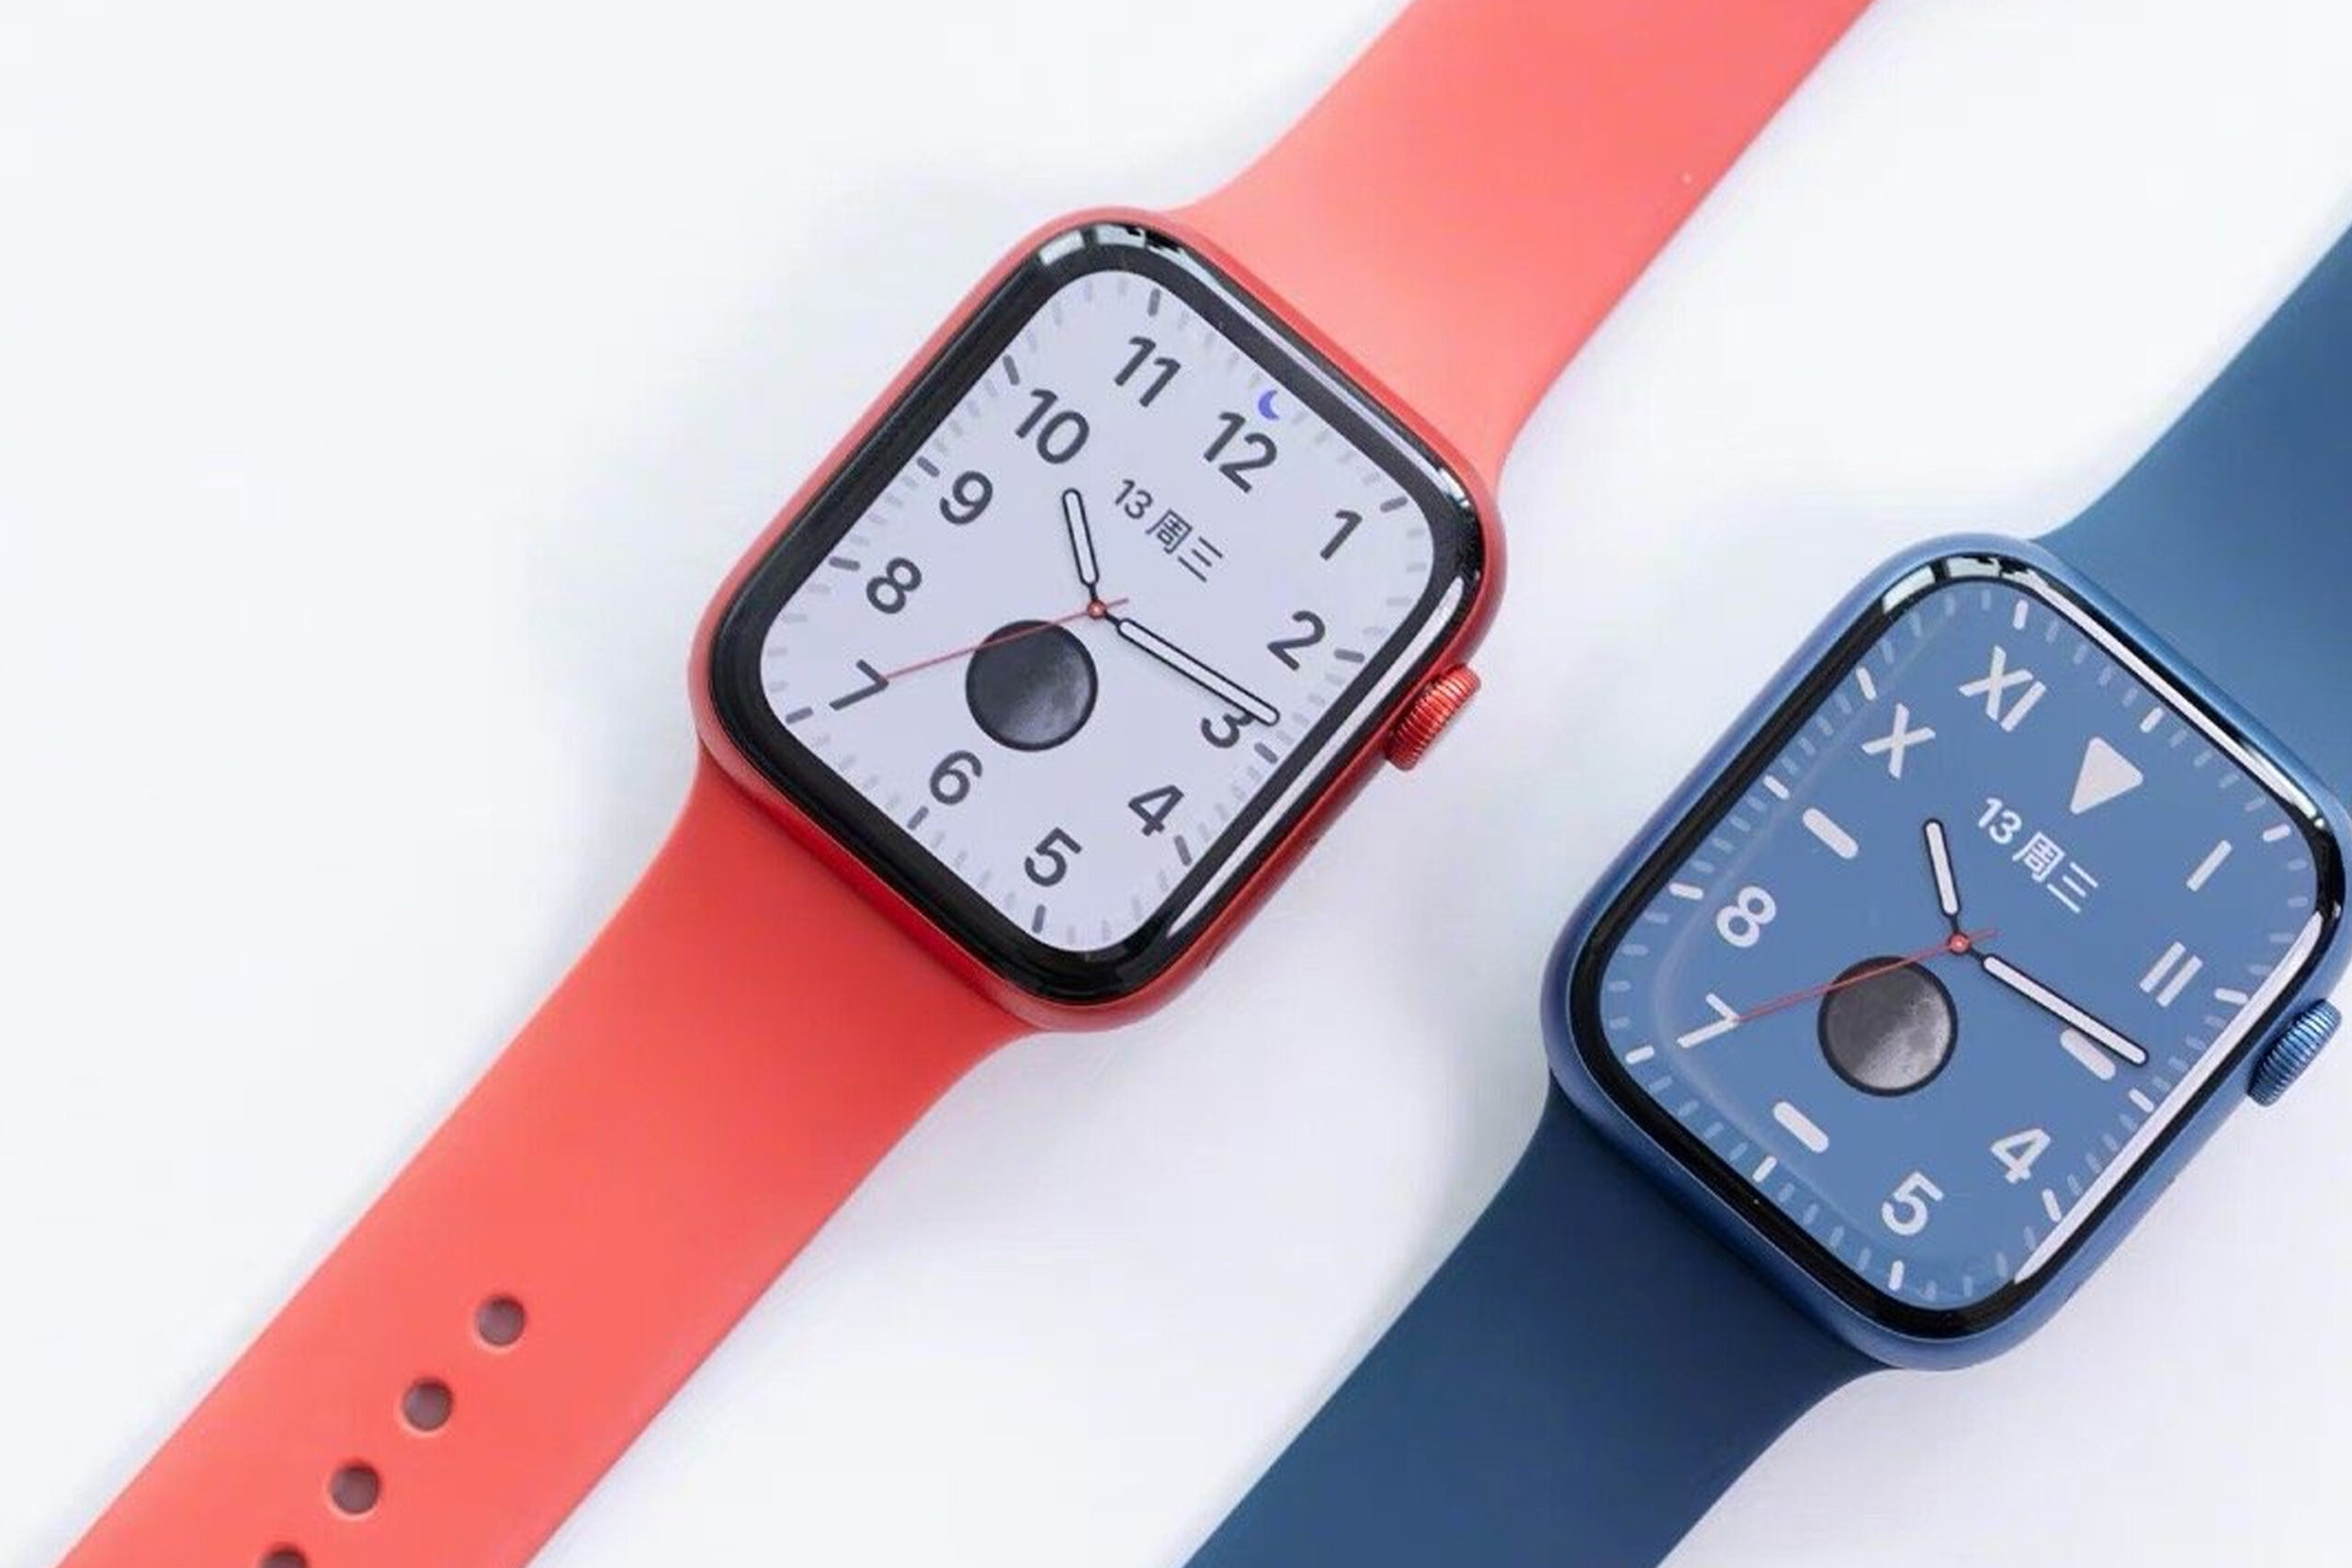 Apple dominates the smartwatch market in Japan, Apple ranks 1st and Xiaomi 4th.